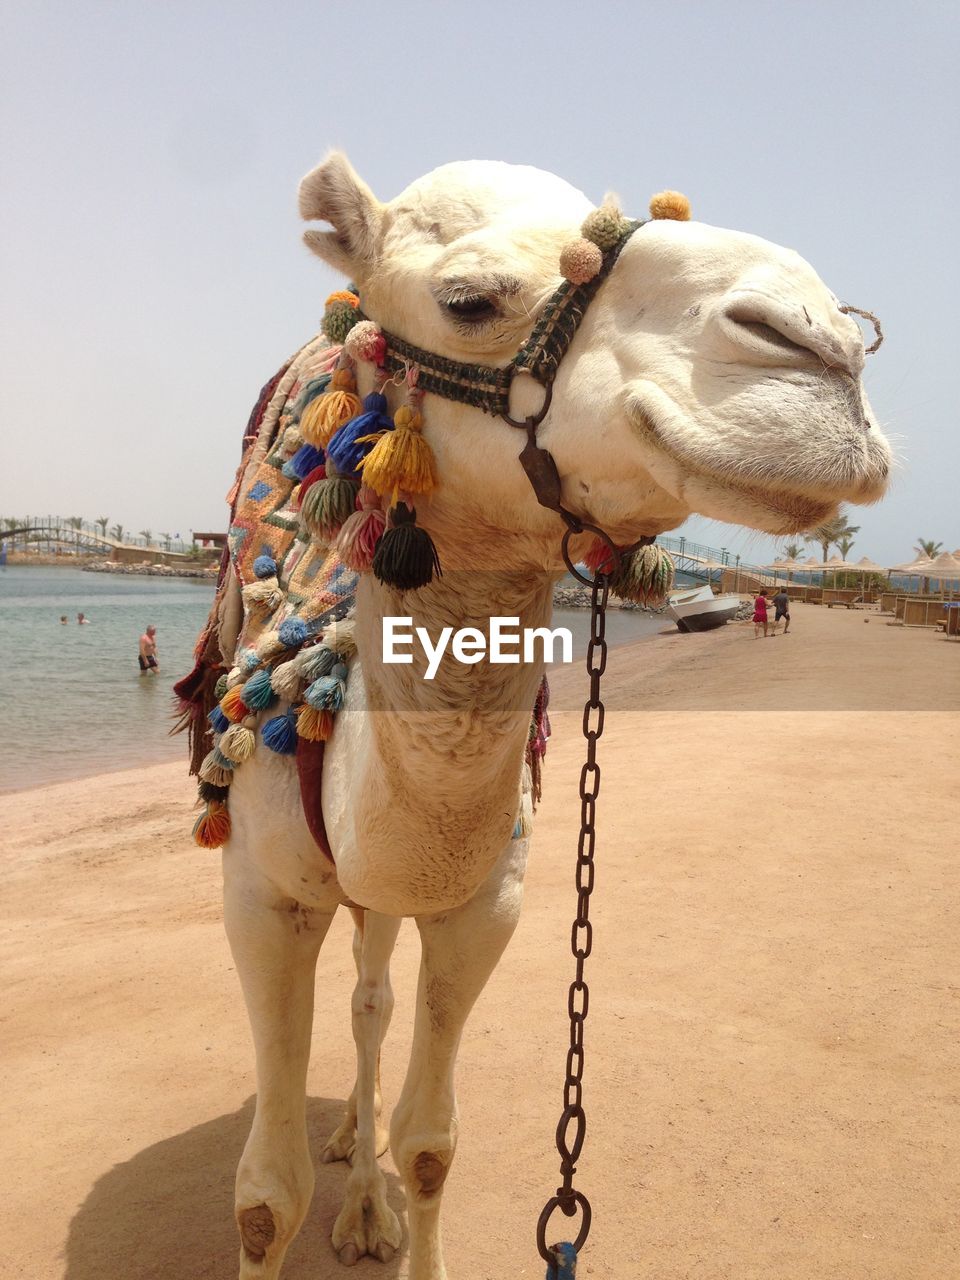 View of camel on beach in egypt